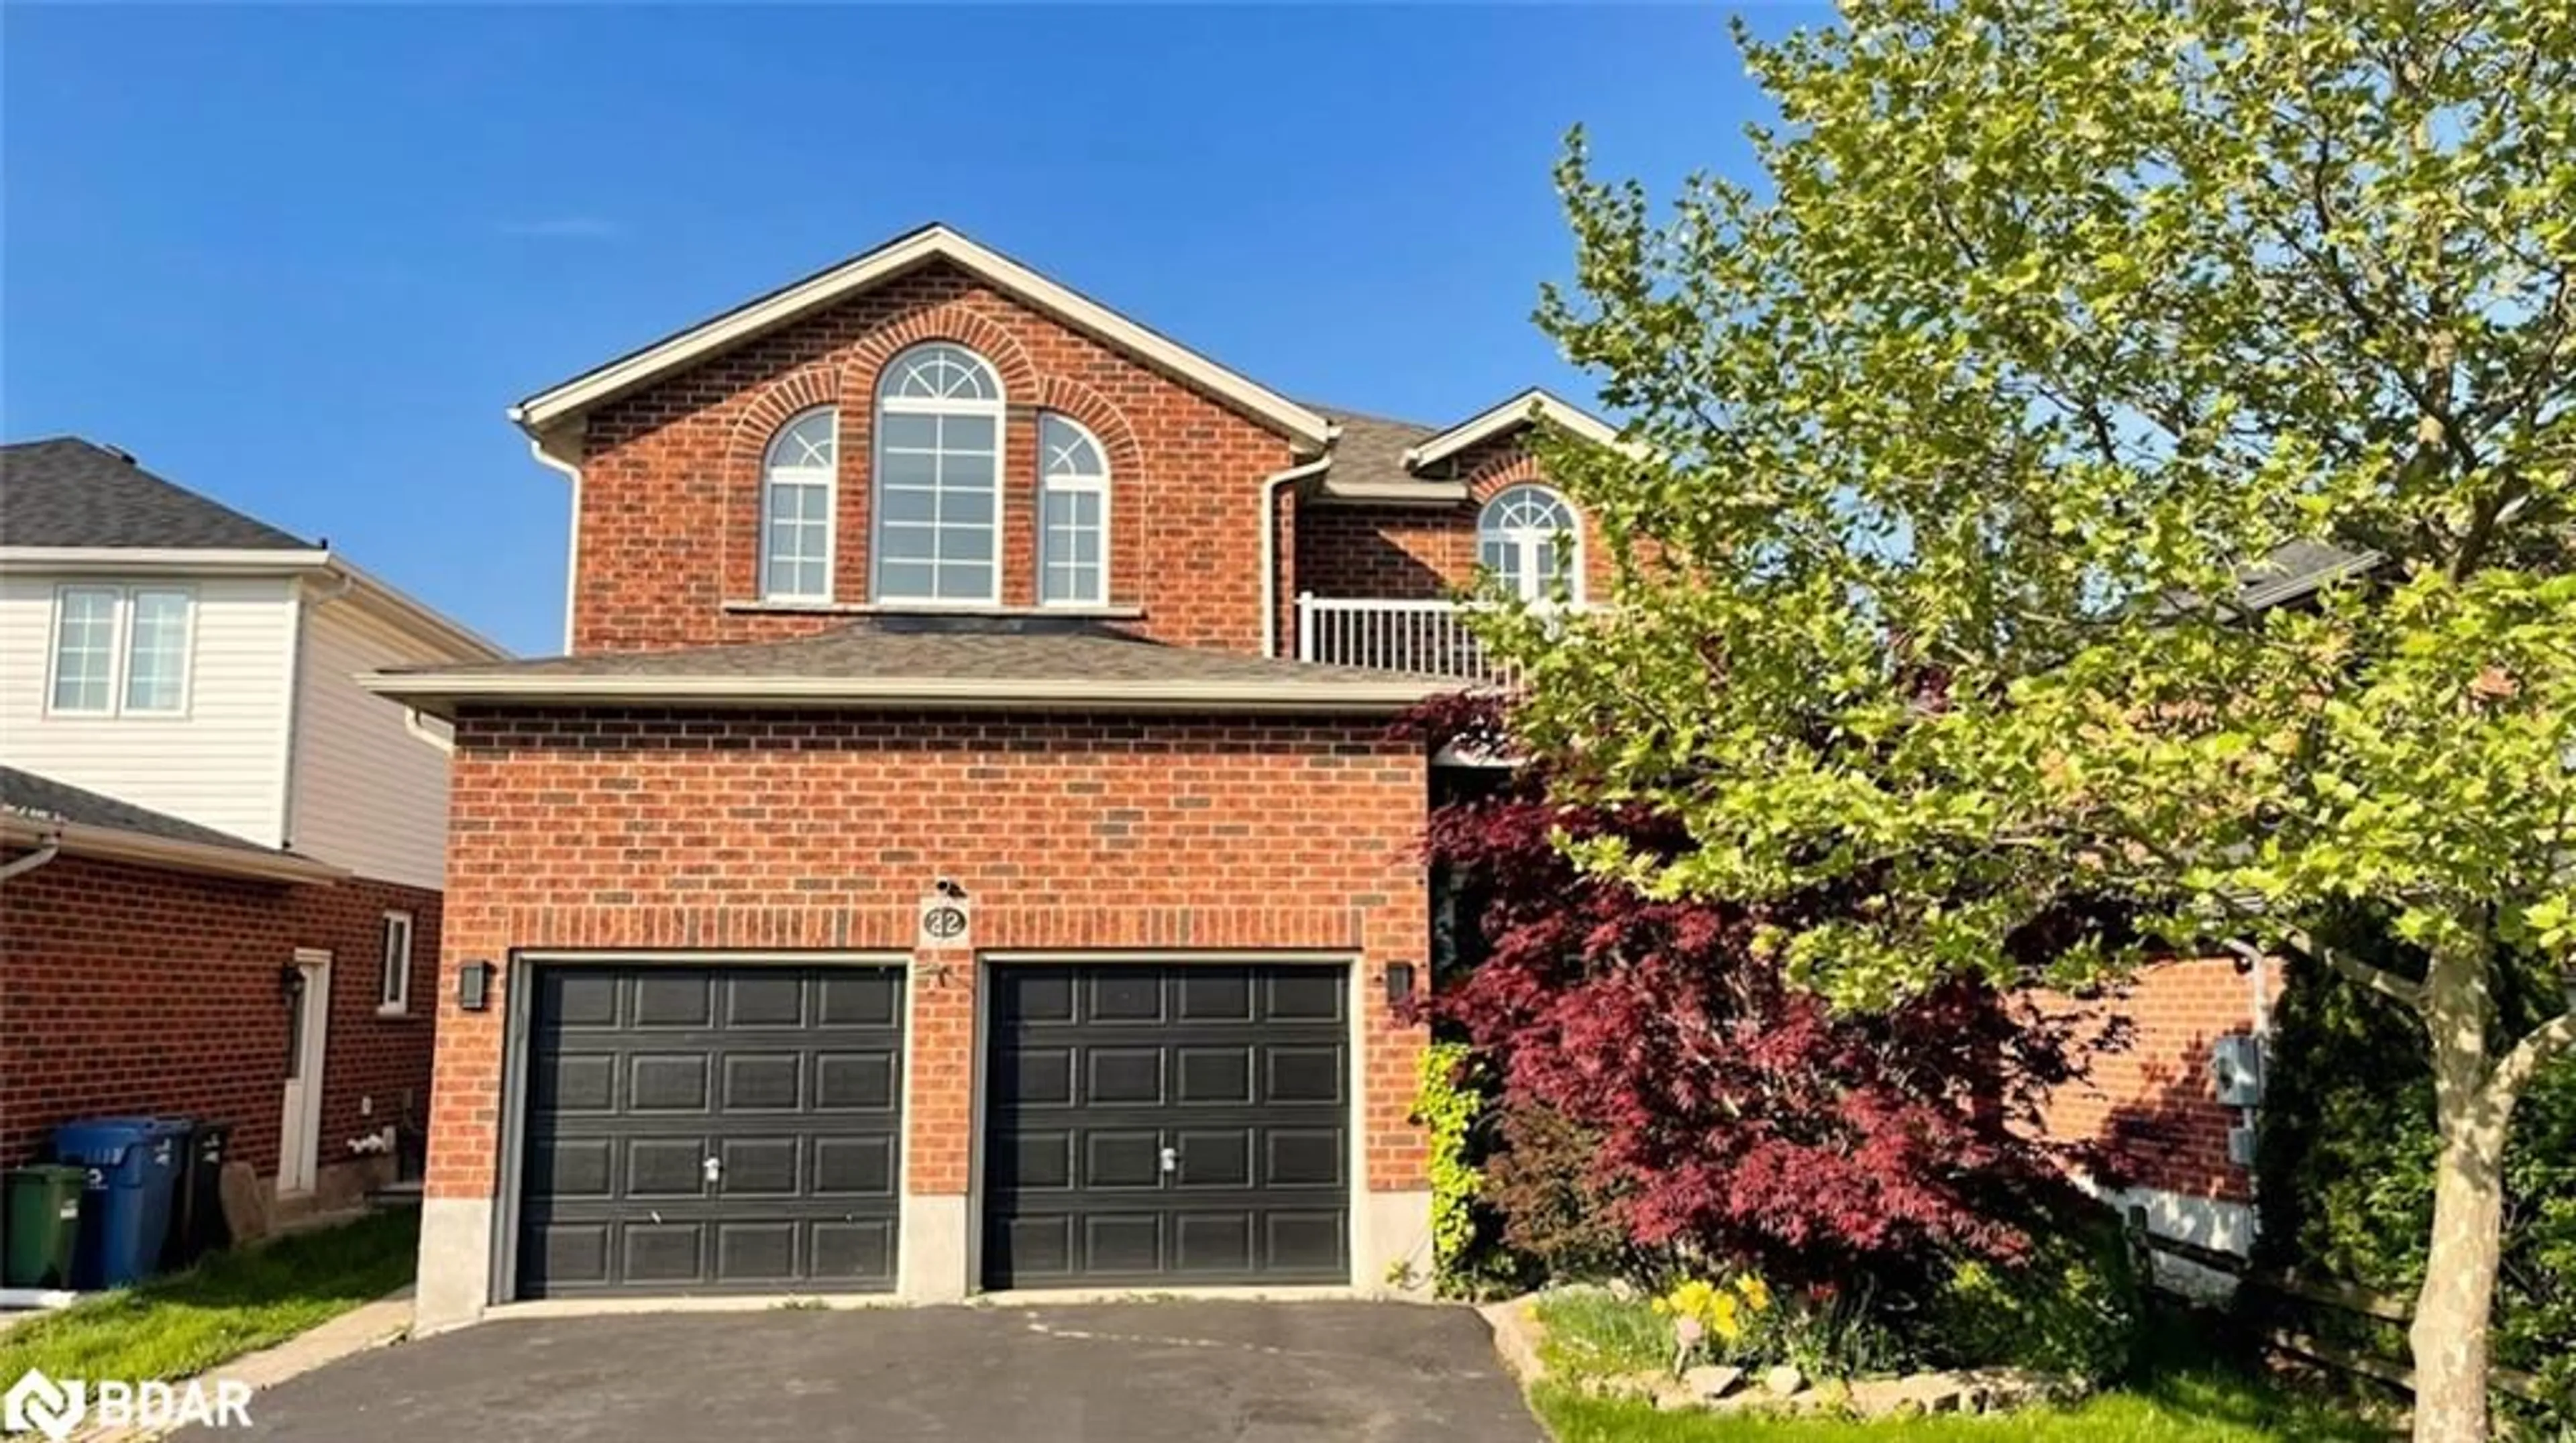 Home with brick exterior material for 22 Zecca Dr, Guelph Ontario N1L 1T1